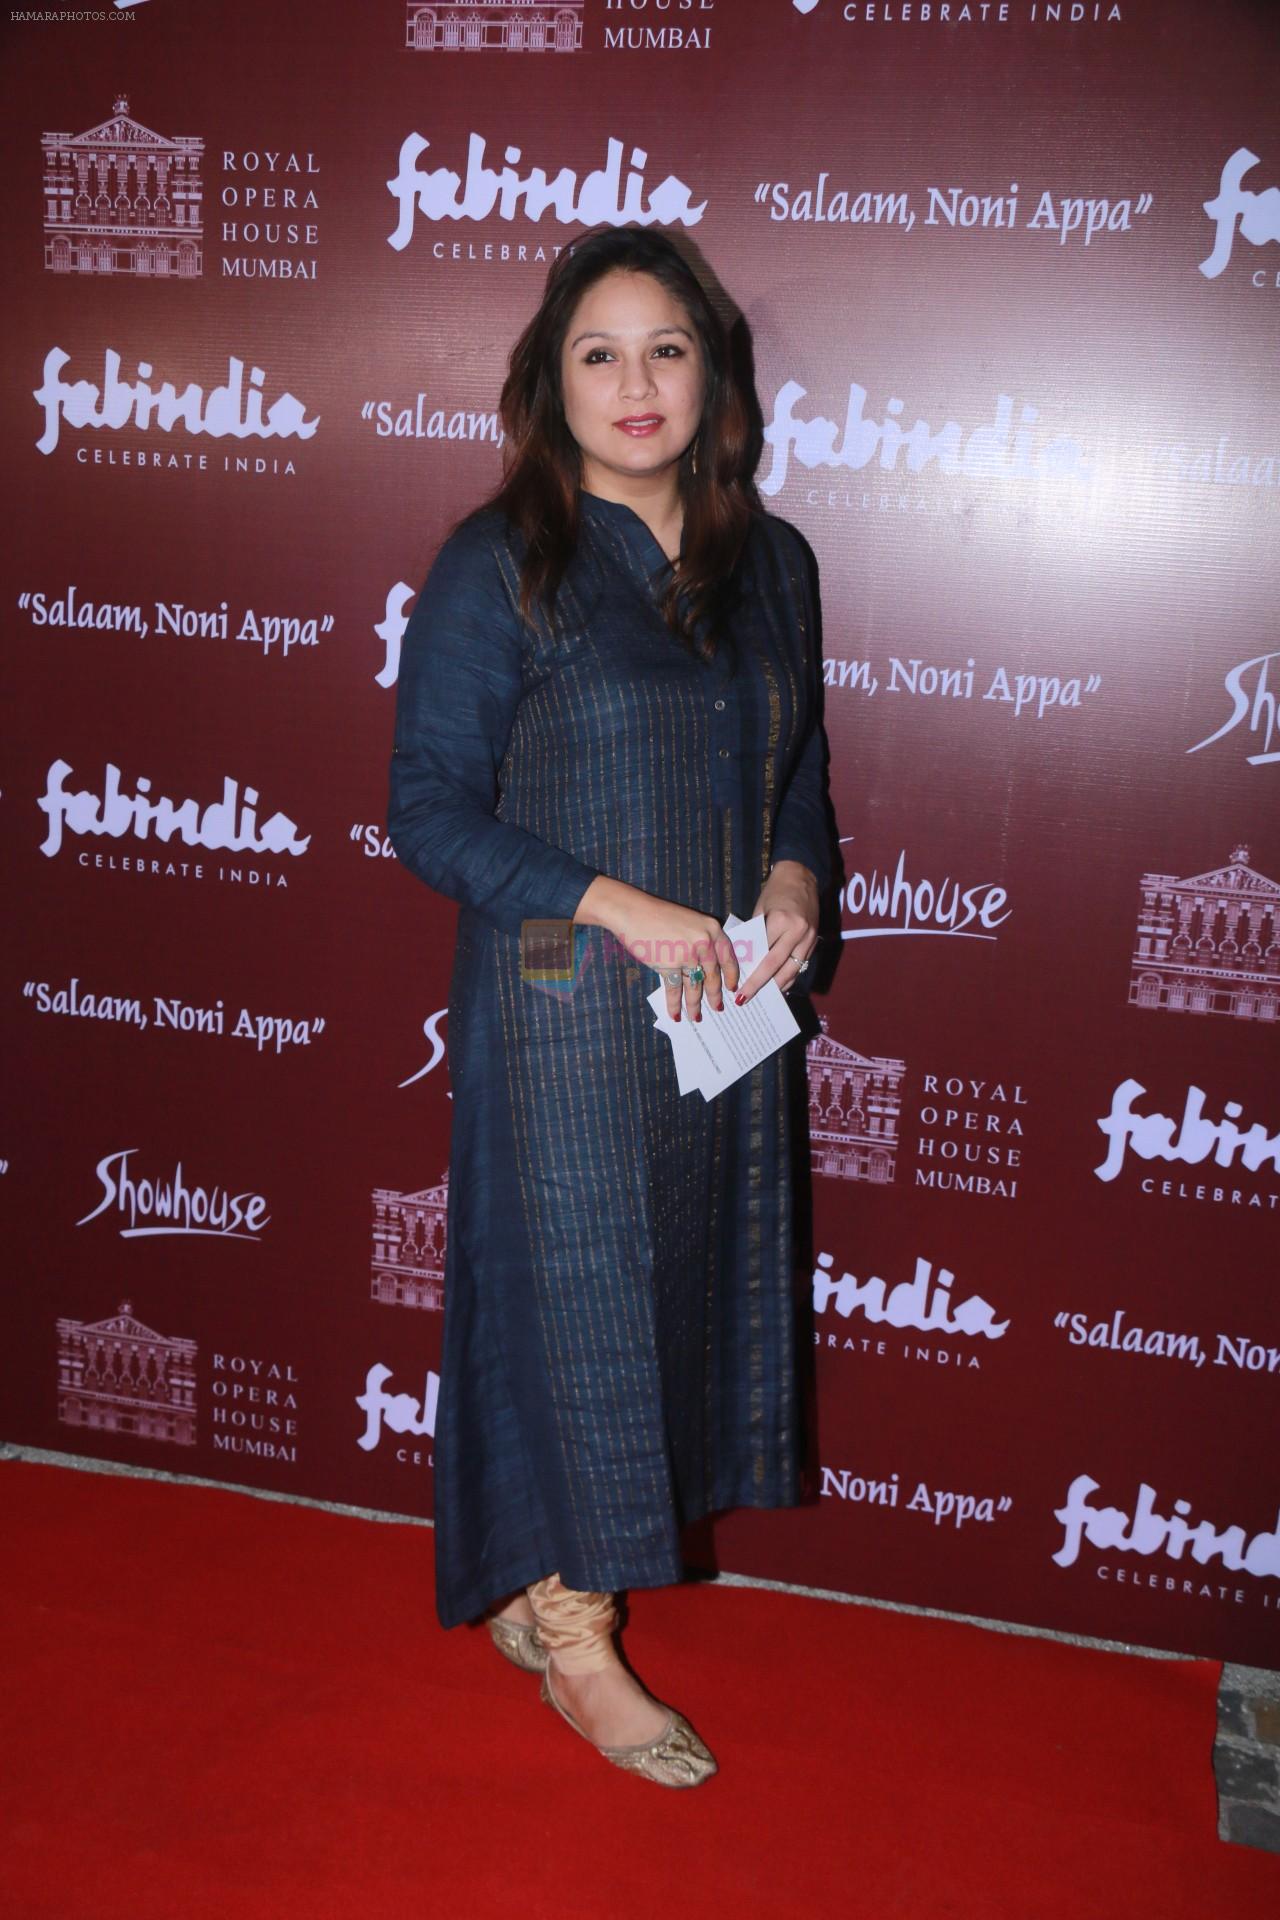 at the Special preview of Salaam Noni Appa based on Twinkle Khanna's novel at Royal Opera House in mumbai on 28th Oct 2017